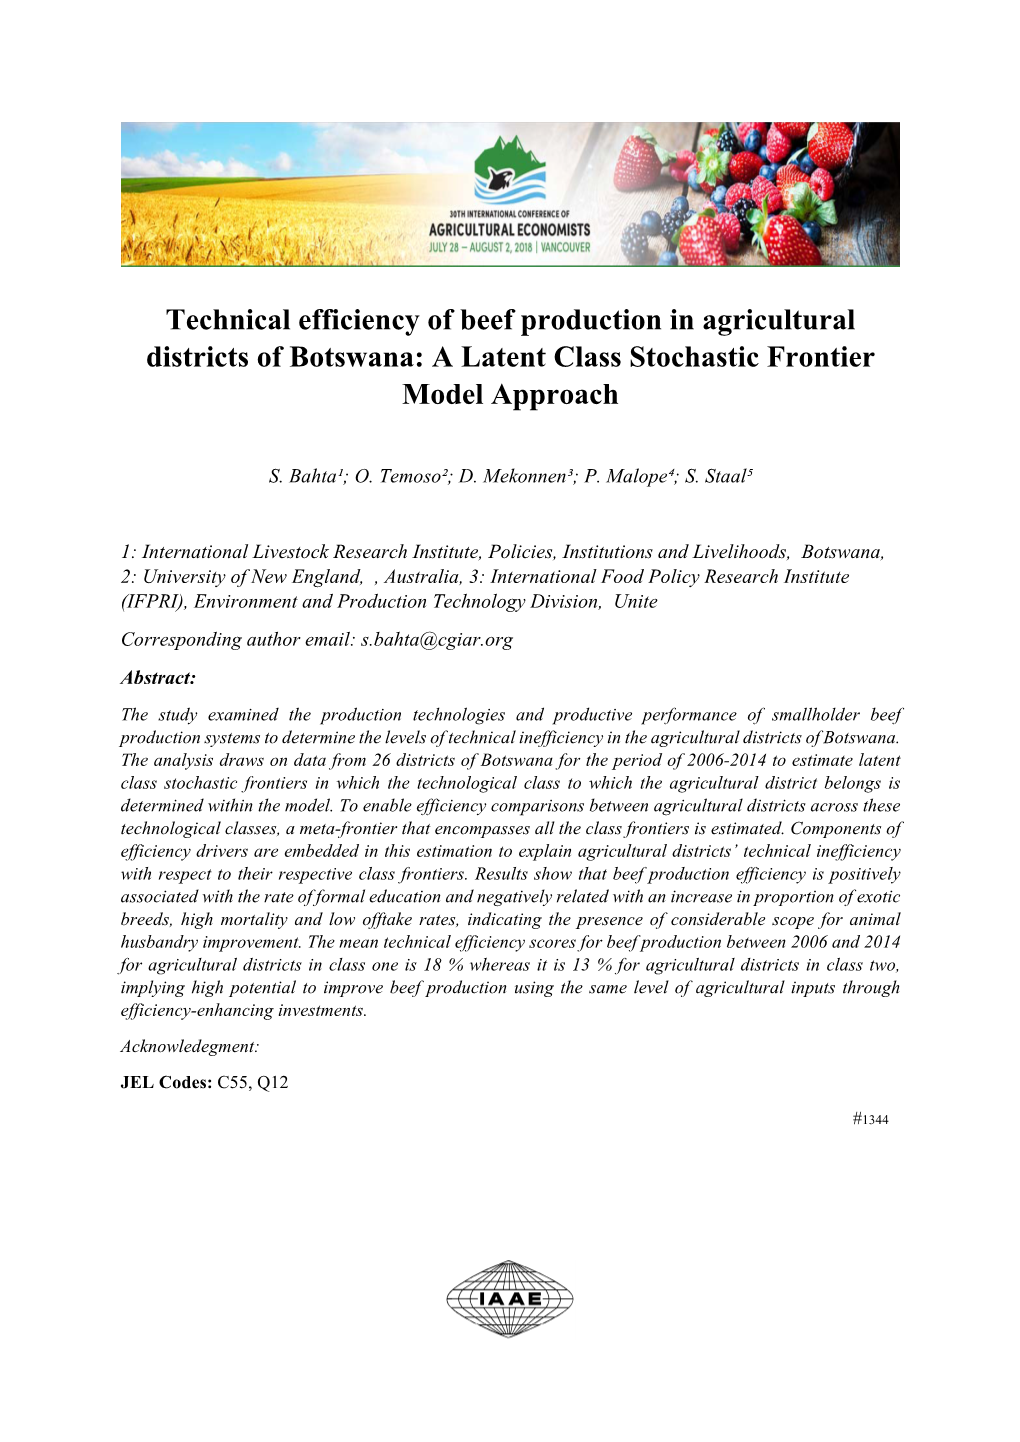 Technical Efficiency of Beef Production in Agricultural Districts of Botswana: a Latent Class Stochastic Frontier Model Approach